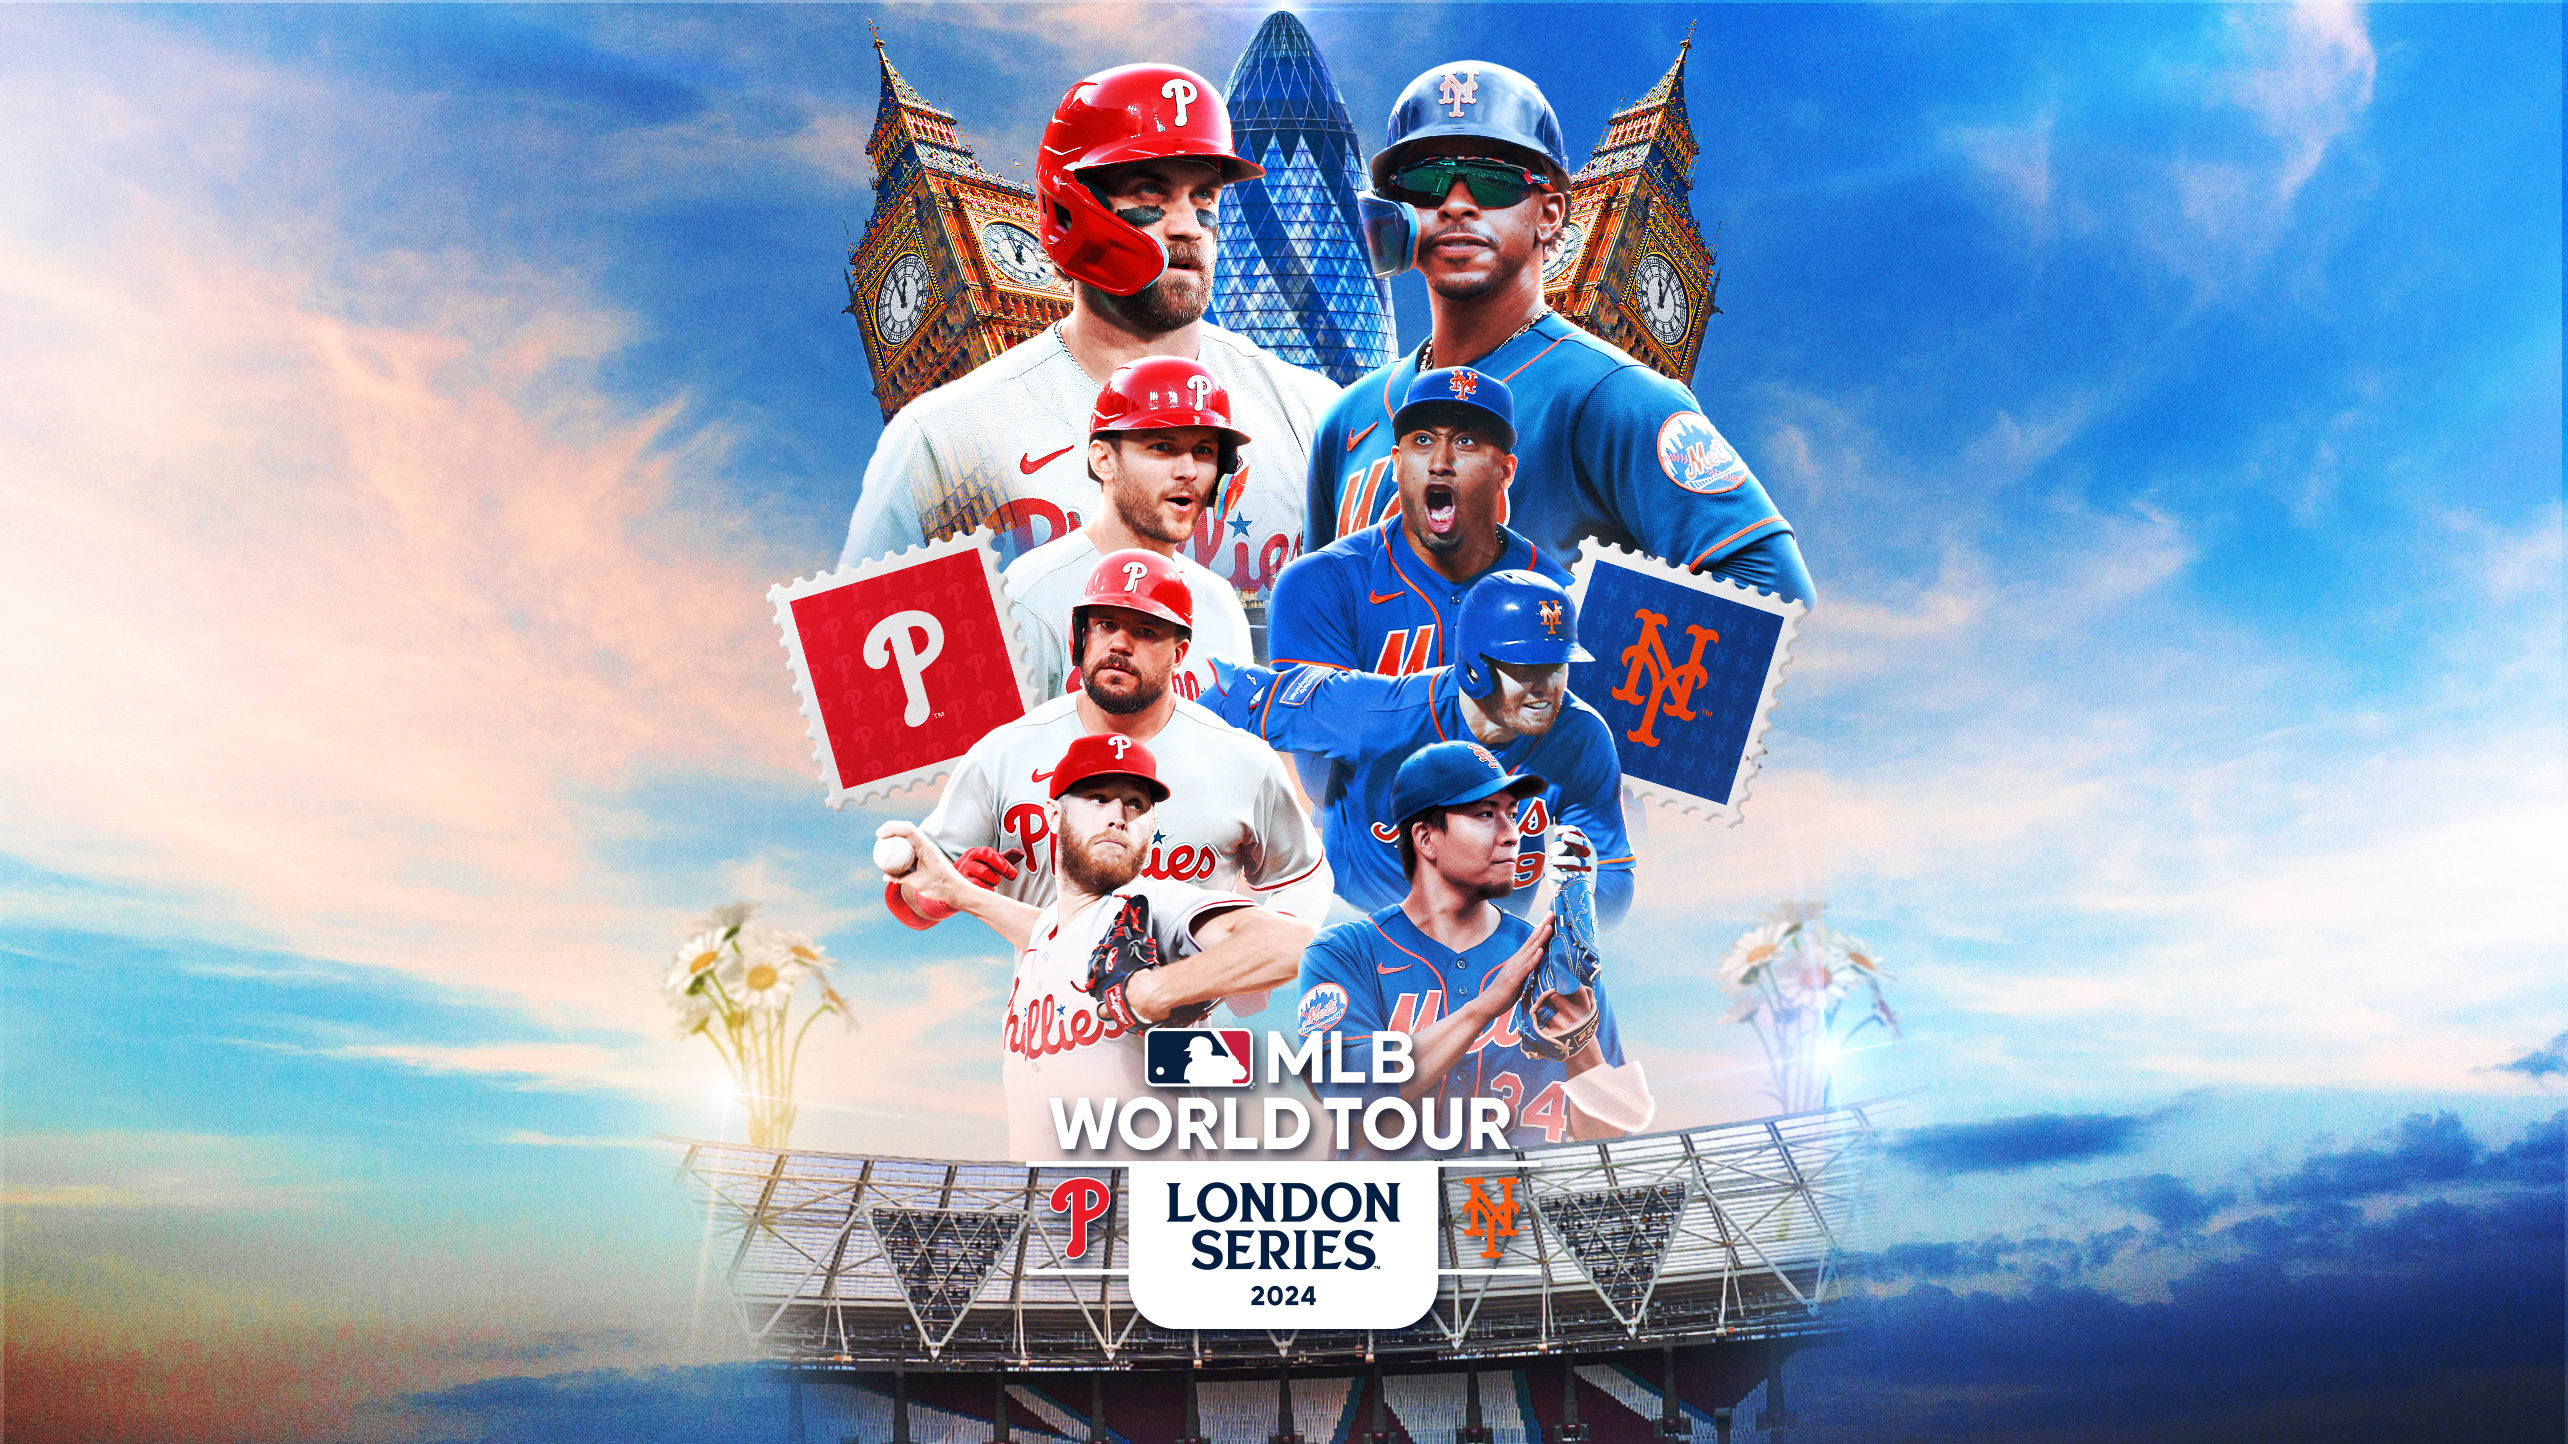 A photo illustration shows four Phillies players and four Mets players above the London Series logo